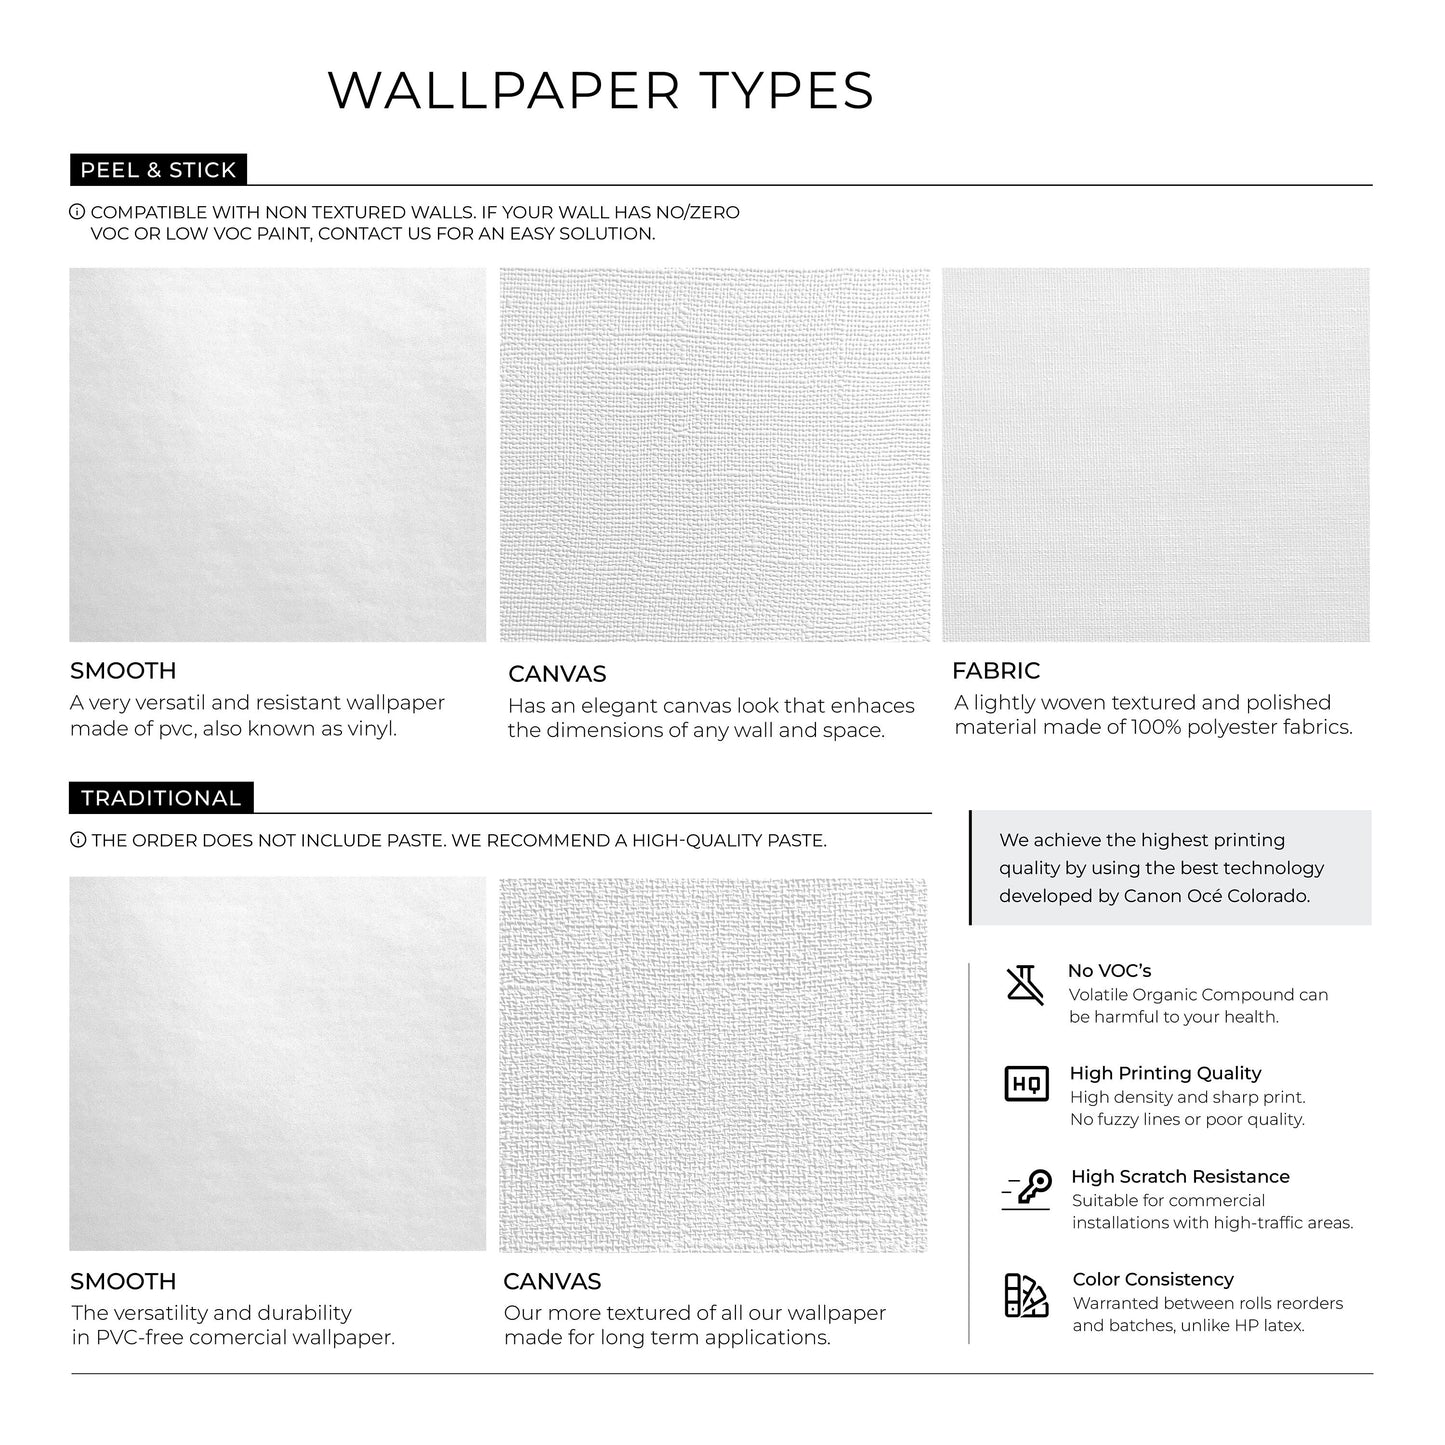 Removable Wallpaper Peel and Stick Wallpaper Wall Paper - Colorful Spots Wallpaper - B253